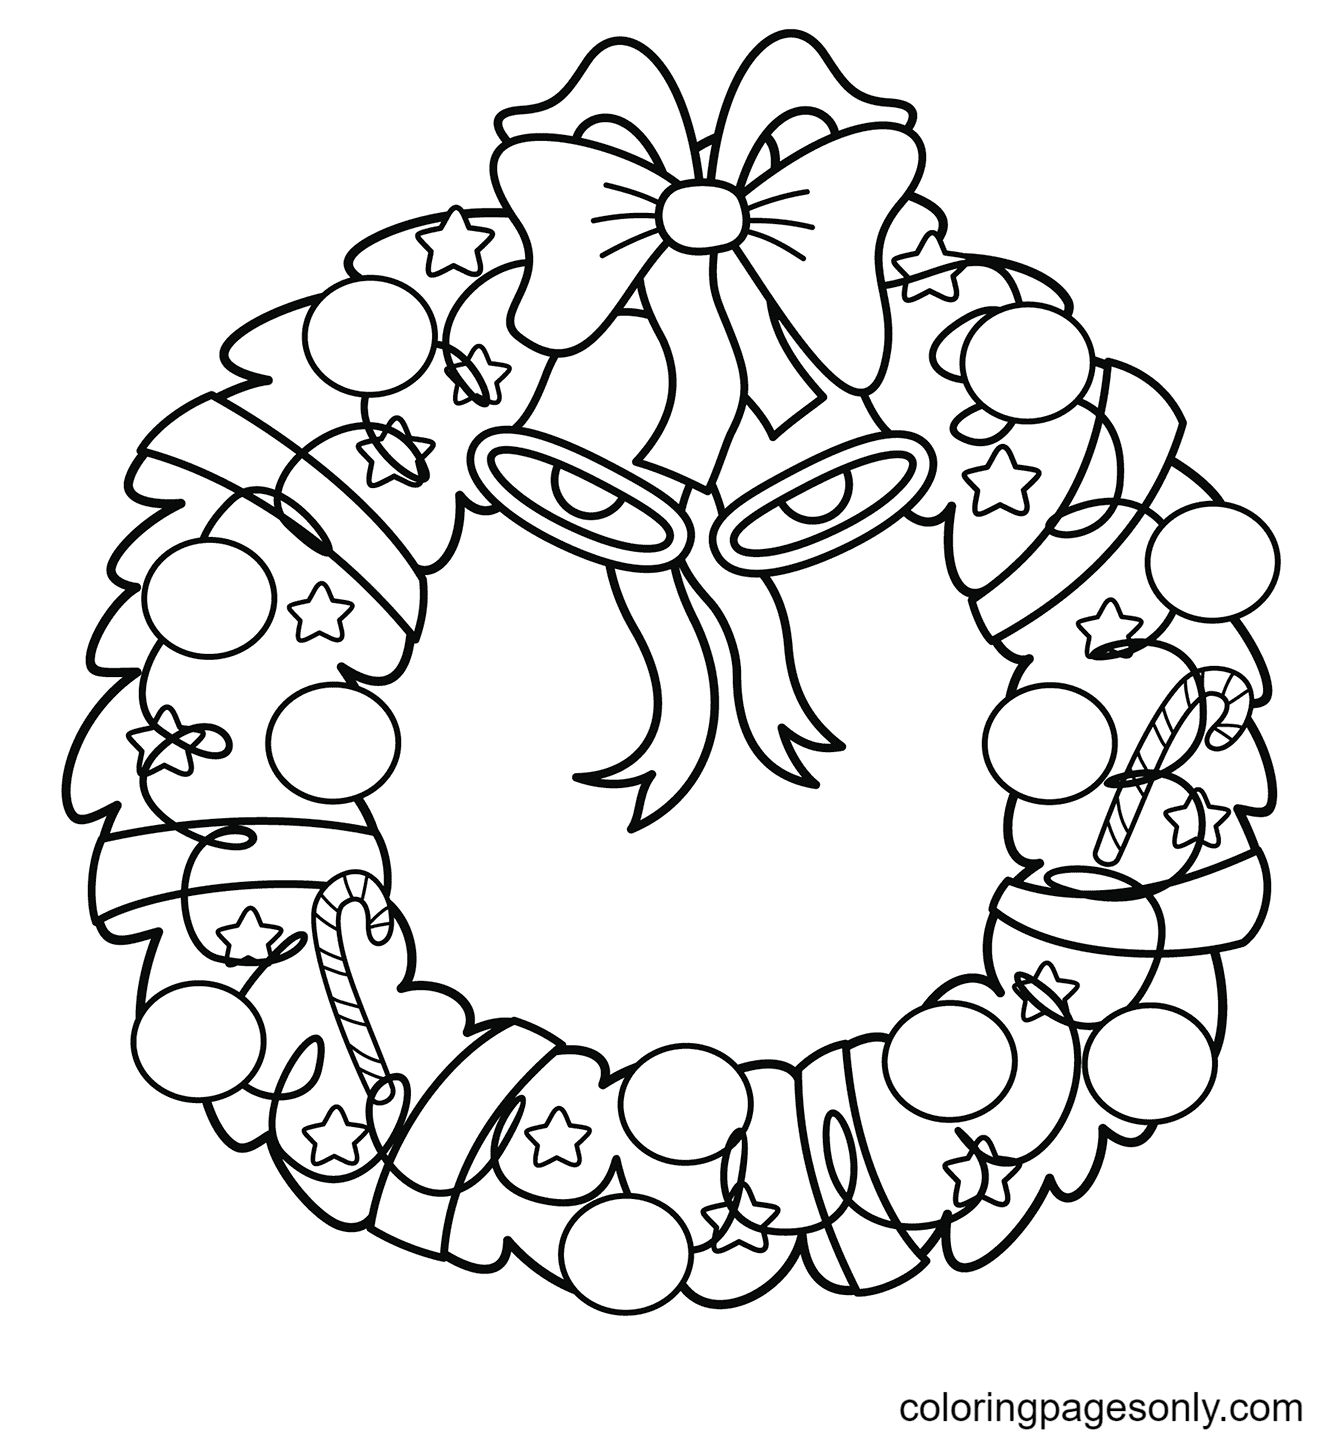 Christmas Wreath with Bells Coloring Page